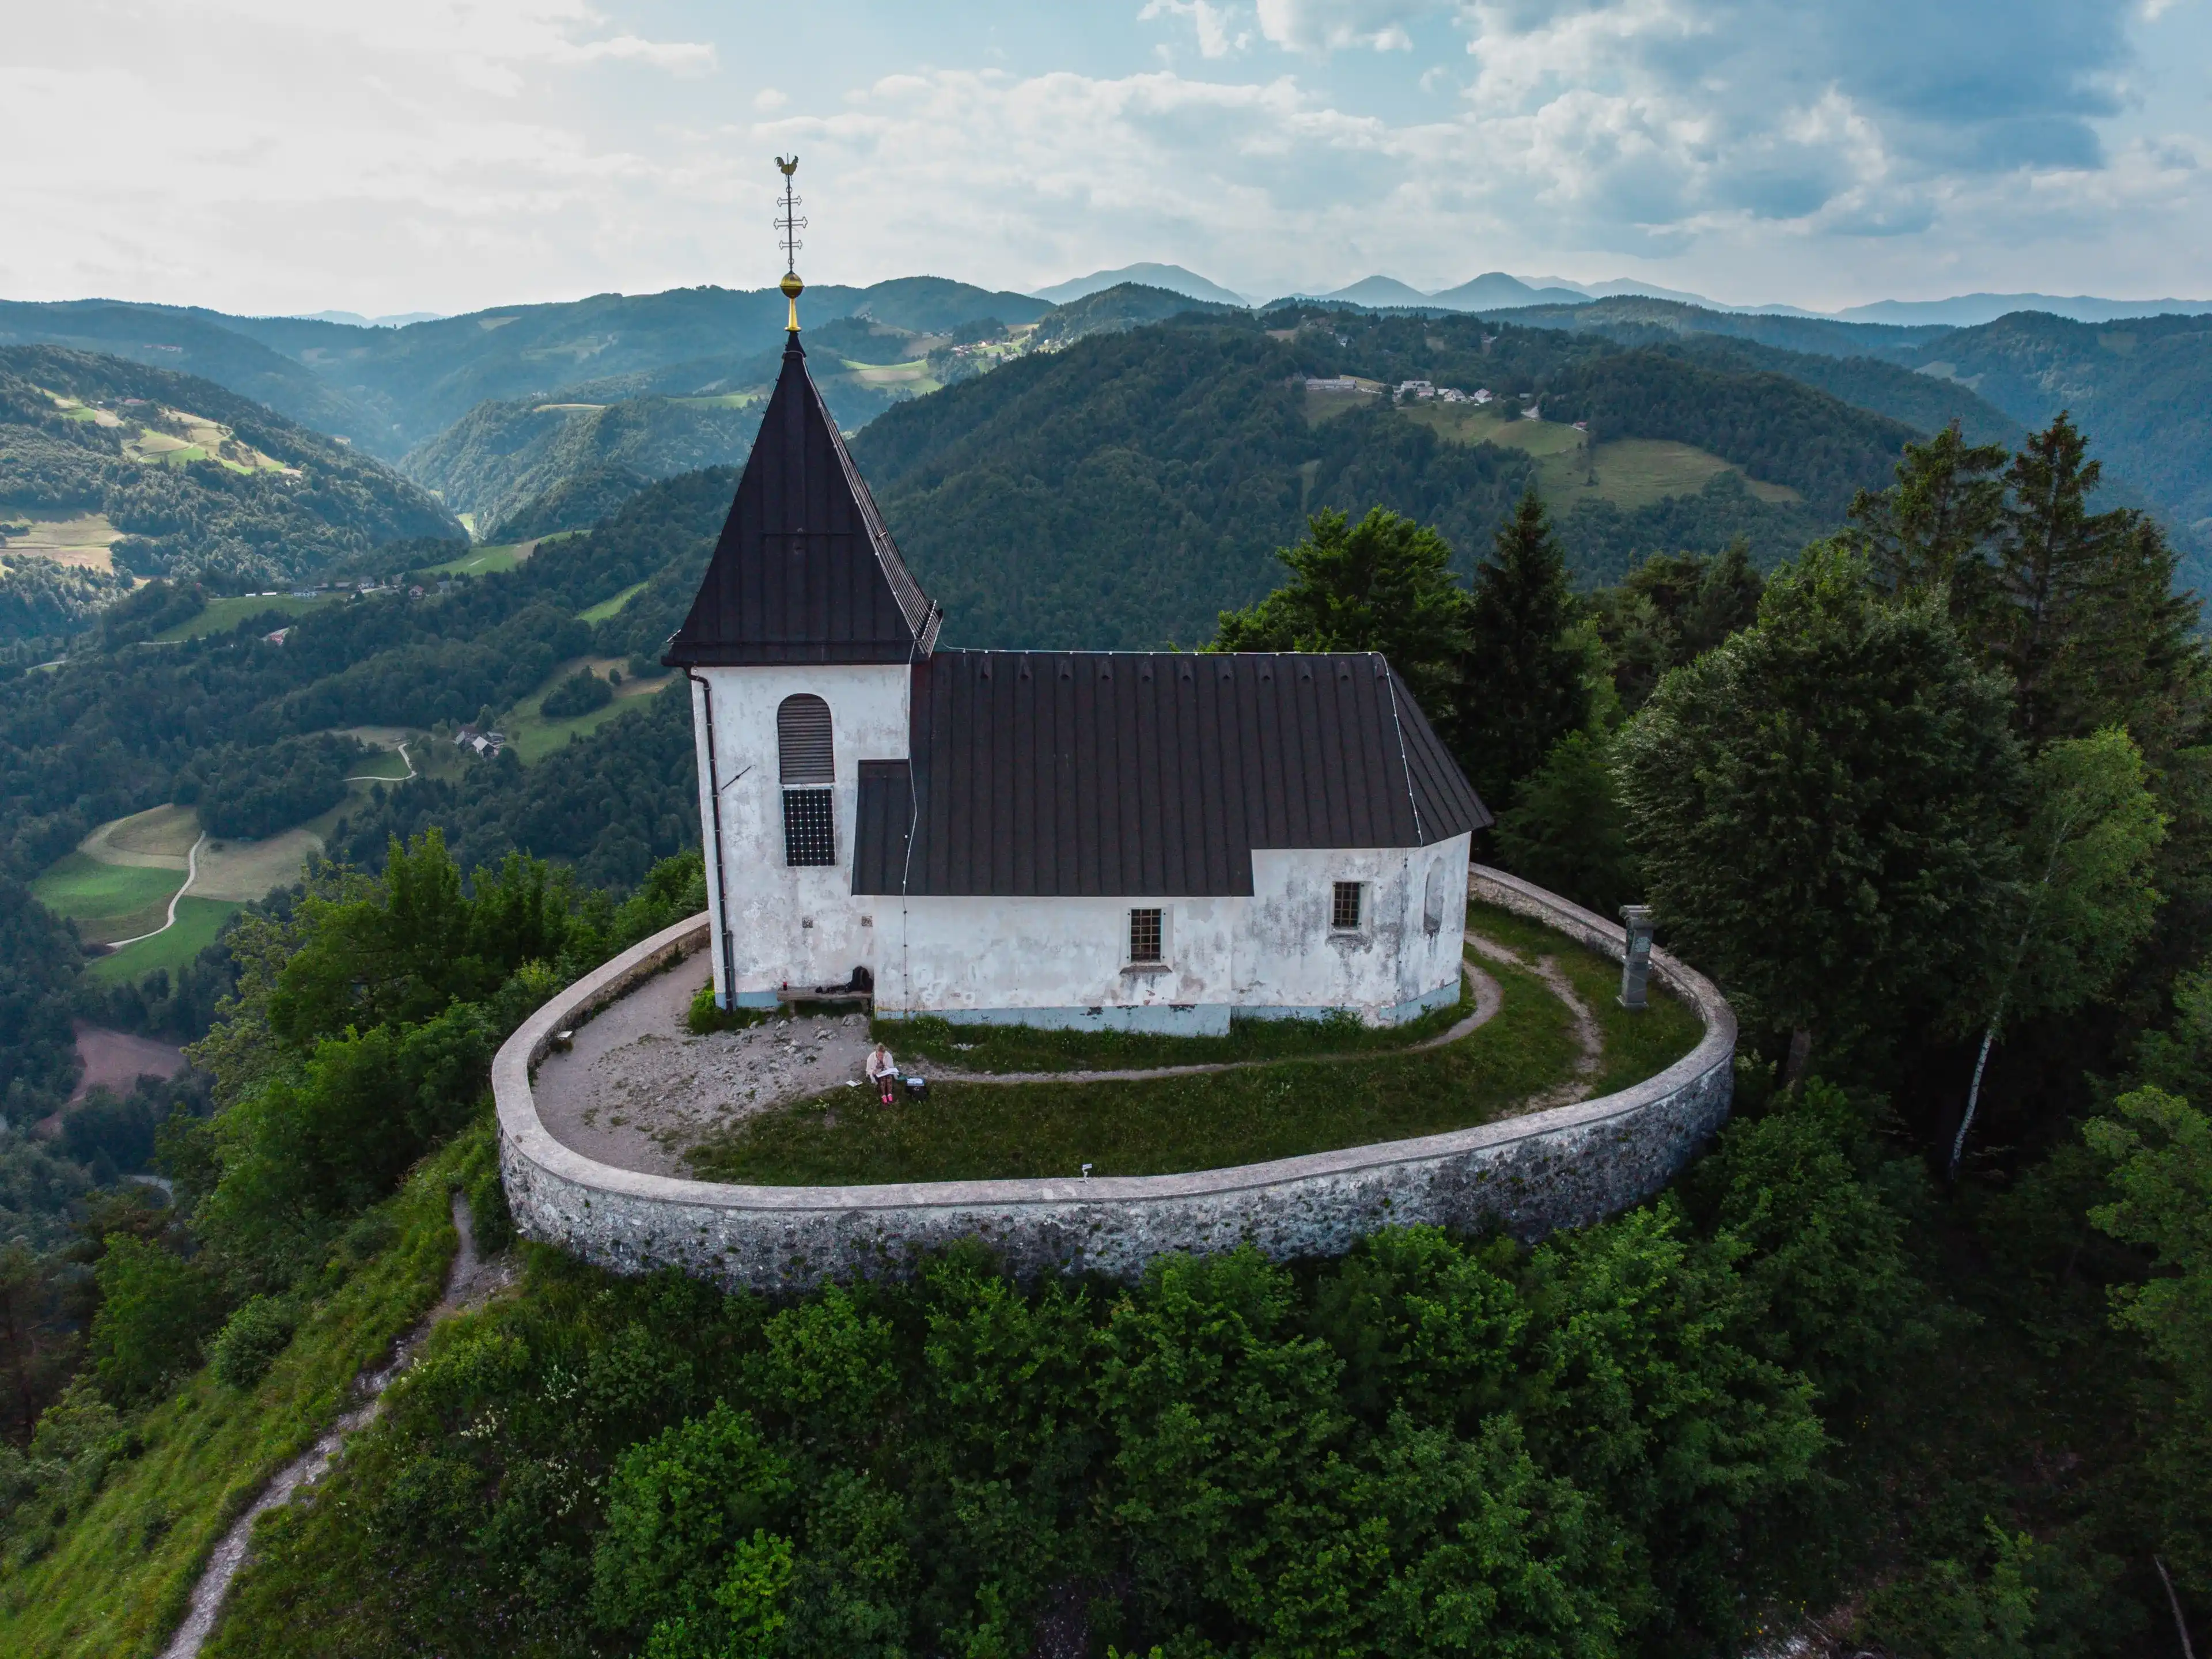 Church Saint Lawrence at the top of Mount Polhov Gradec aka Mount Saint Lawrence Hill in the Polhov Gradec